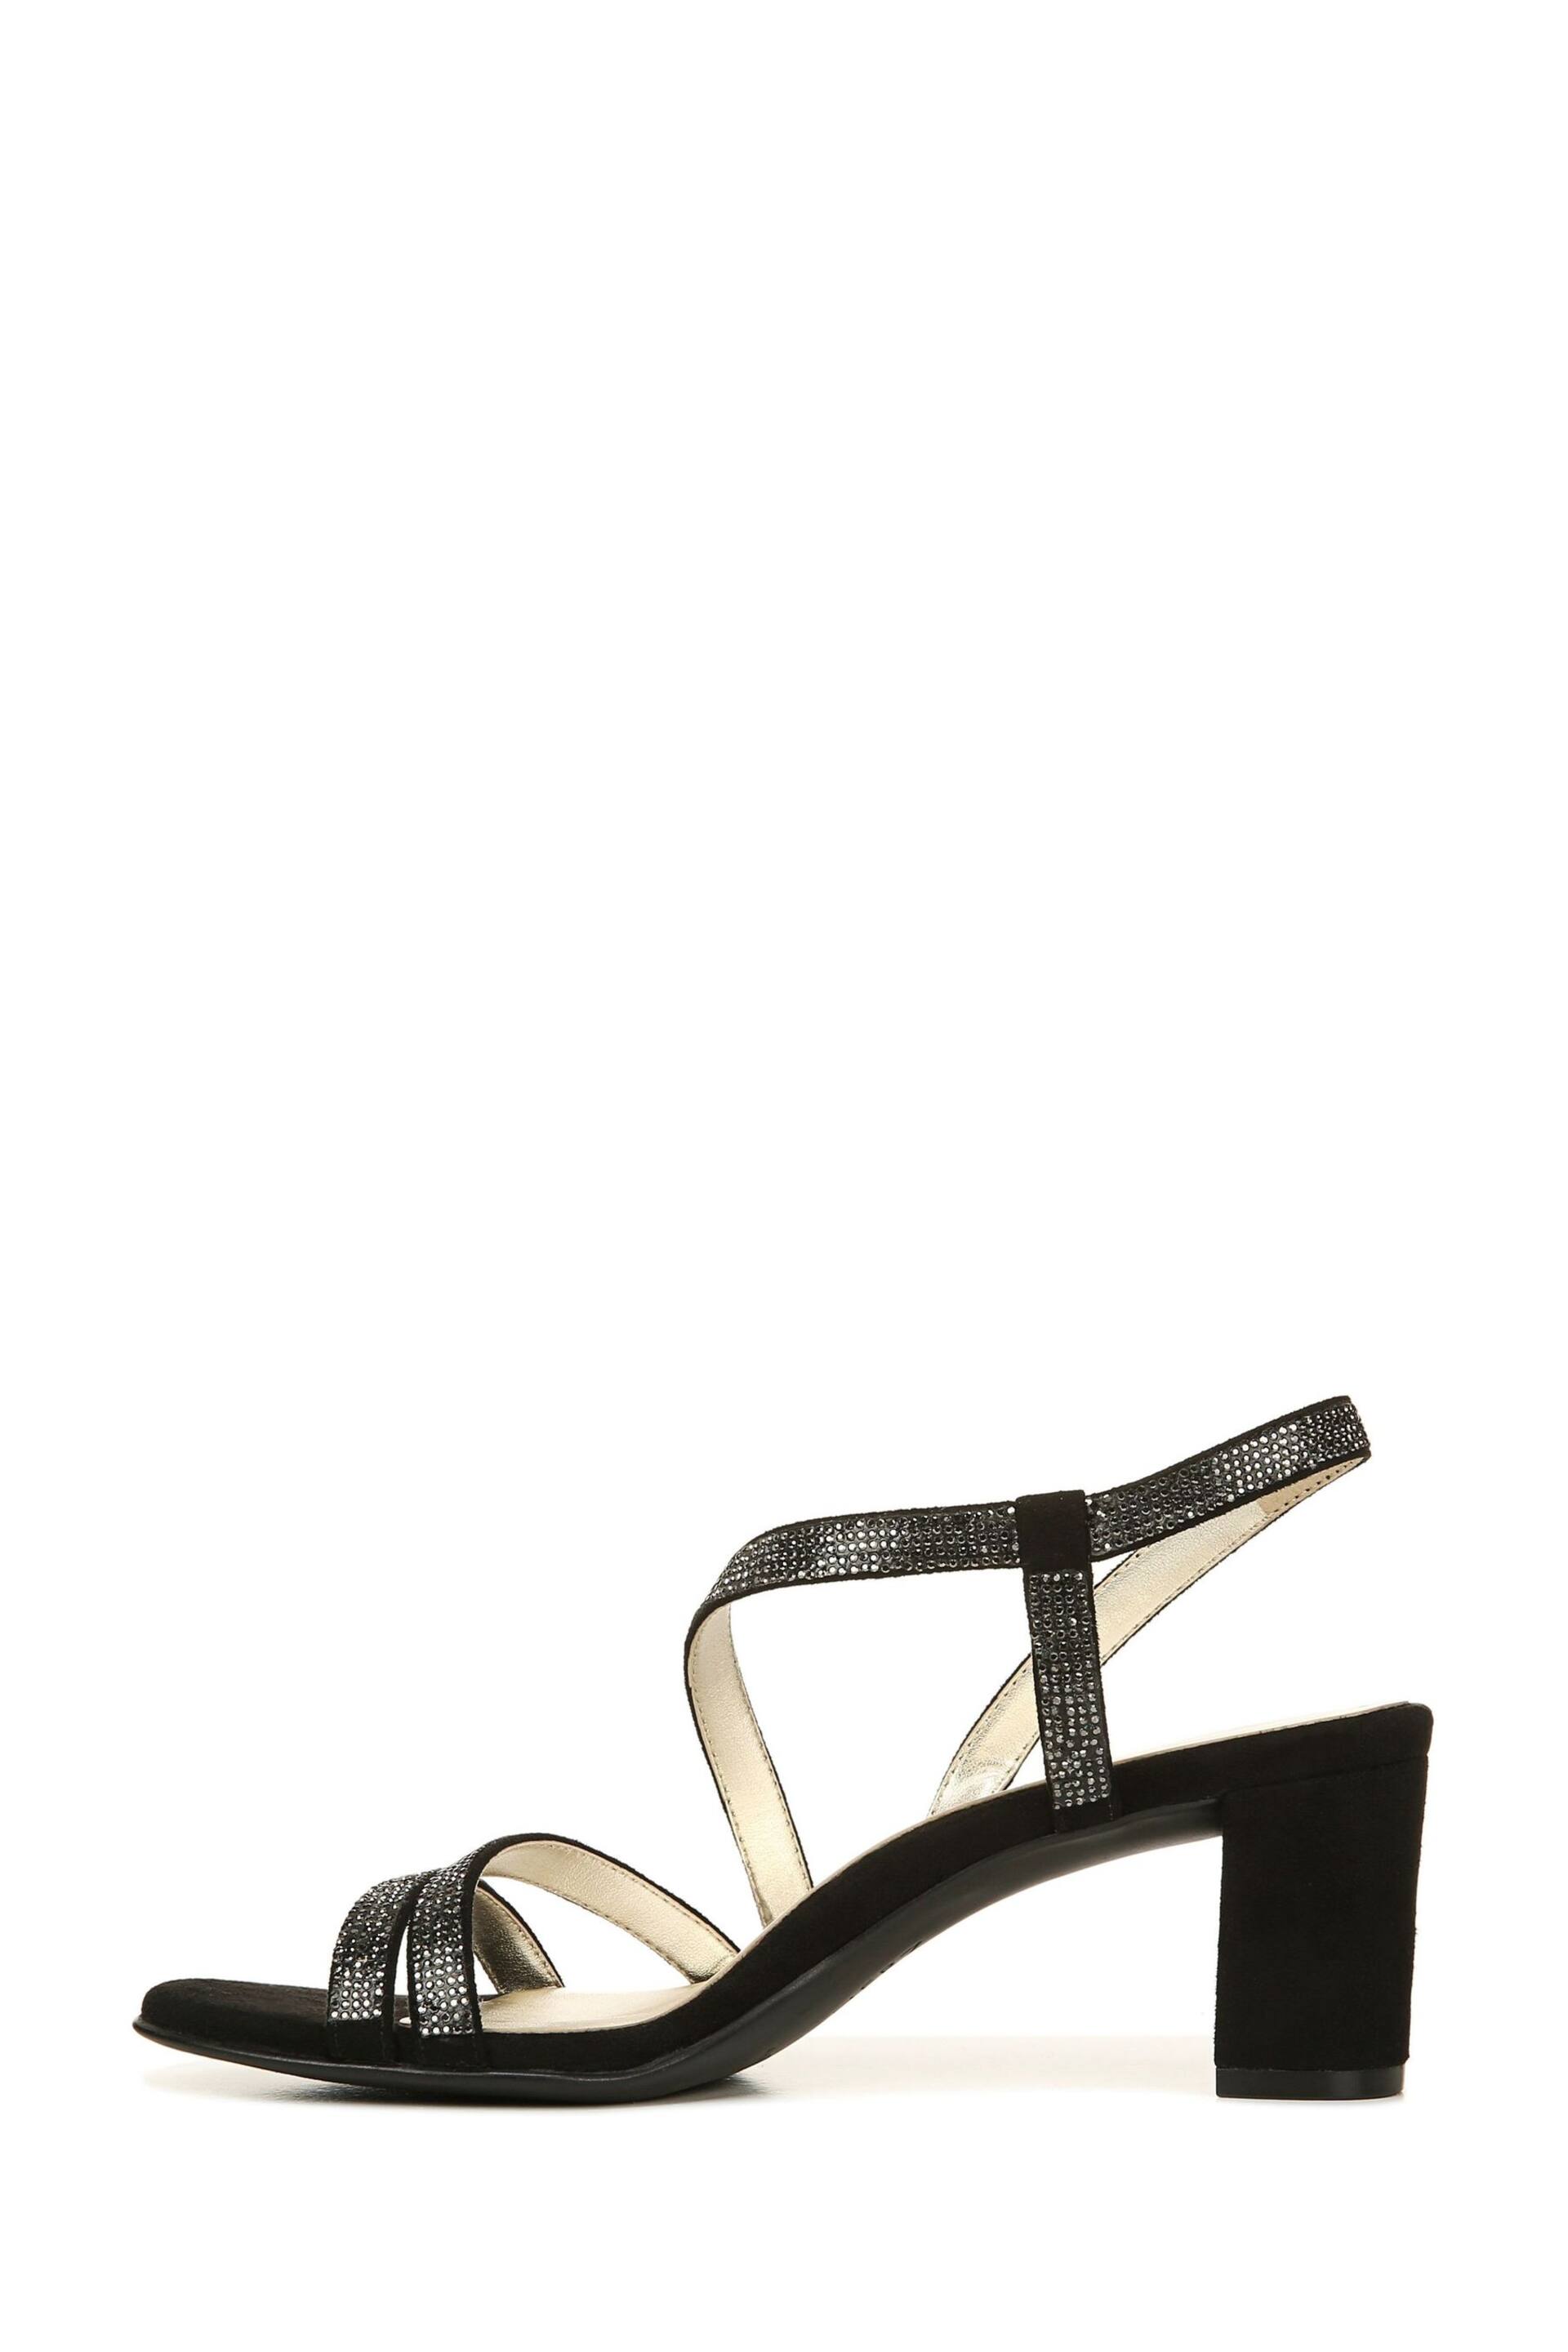 Naturalizer Vanessa Strappy Sandals - Image 2 of 7